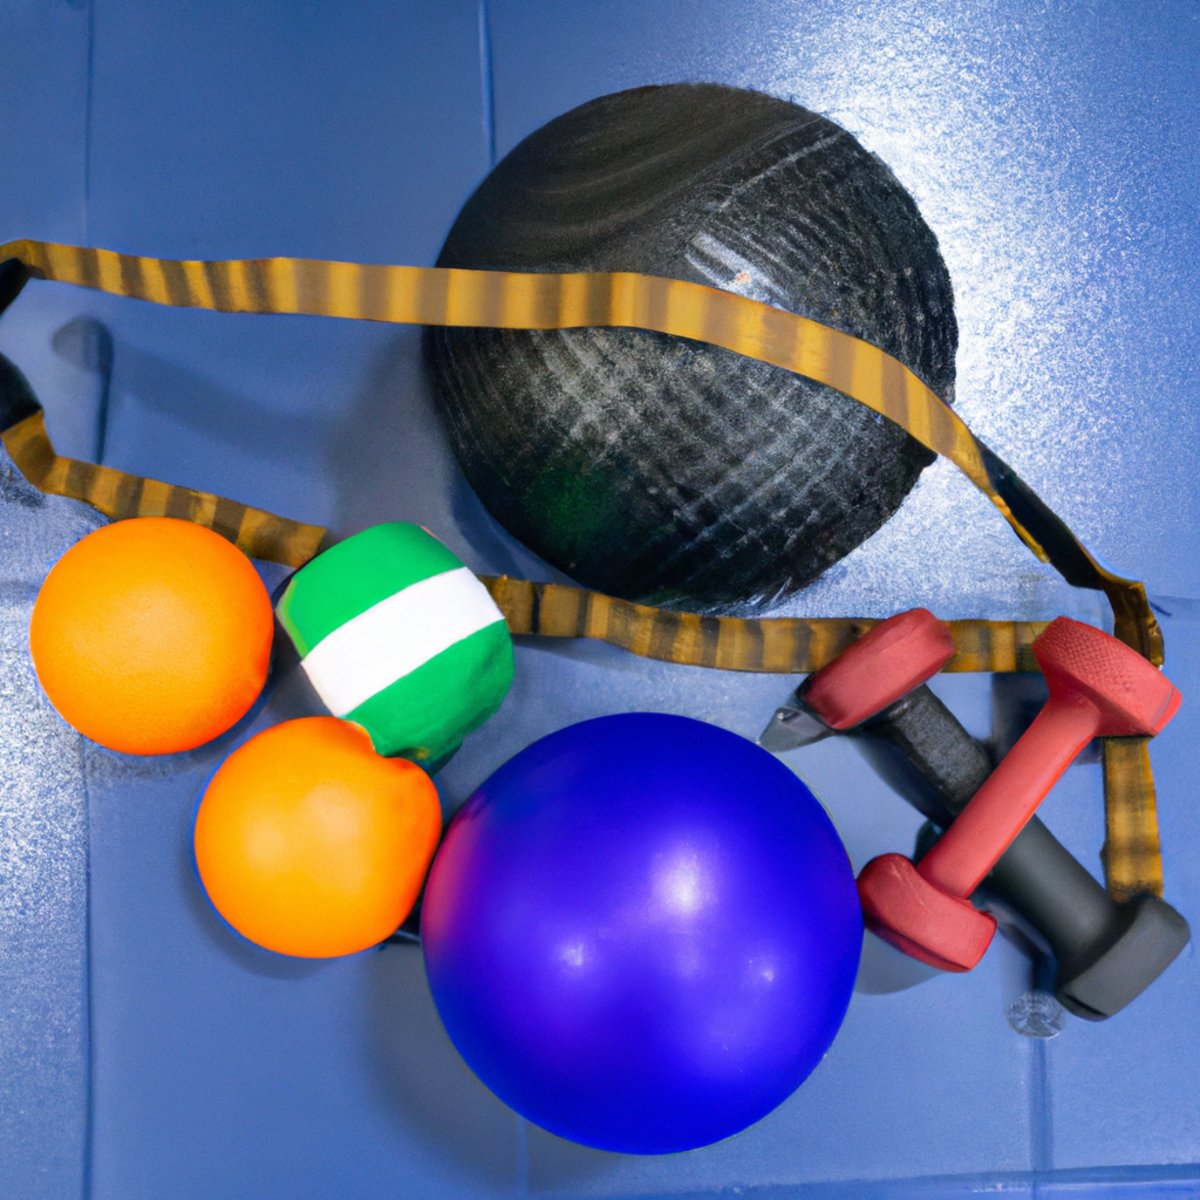 The photo captures a set of weights, a resistance band, and a medicine ball arranged neatly on a gym floor. The weights are of varying sizes and colors, with the largest ones placed at the back. The resistance band is stretched out and attached to a nearby pillar, ready for use. The medicine ball is positioned in the center, with its textured surface inviting the athlete to grab hold and start training. The lighting is bright and natural, highlighting the details of each object and creating a sense of energy and motivation. This photo perfectly represents the tools and equipment needed for effective resistance training, encouraging athletes to take action and improve their performance.